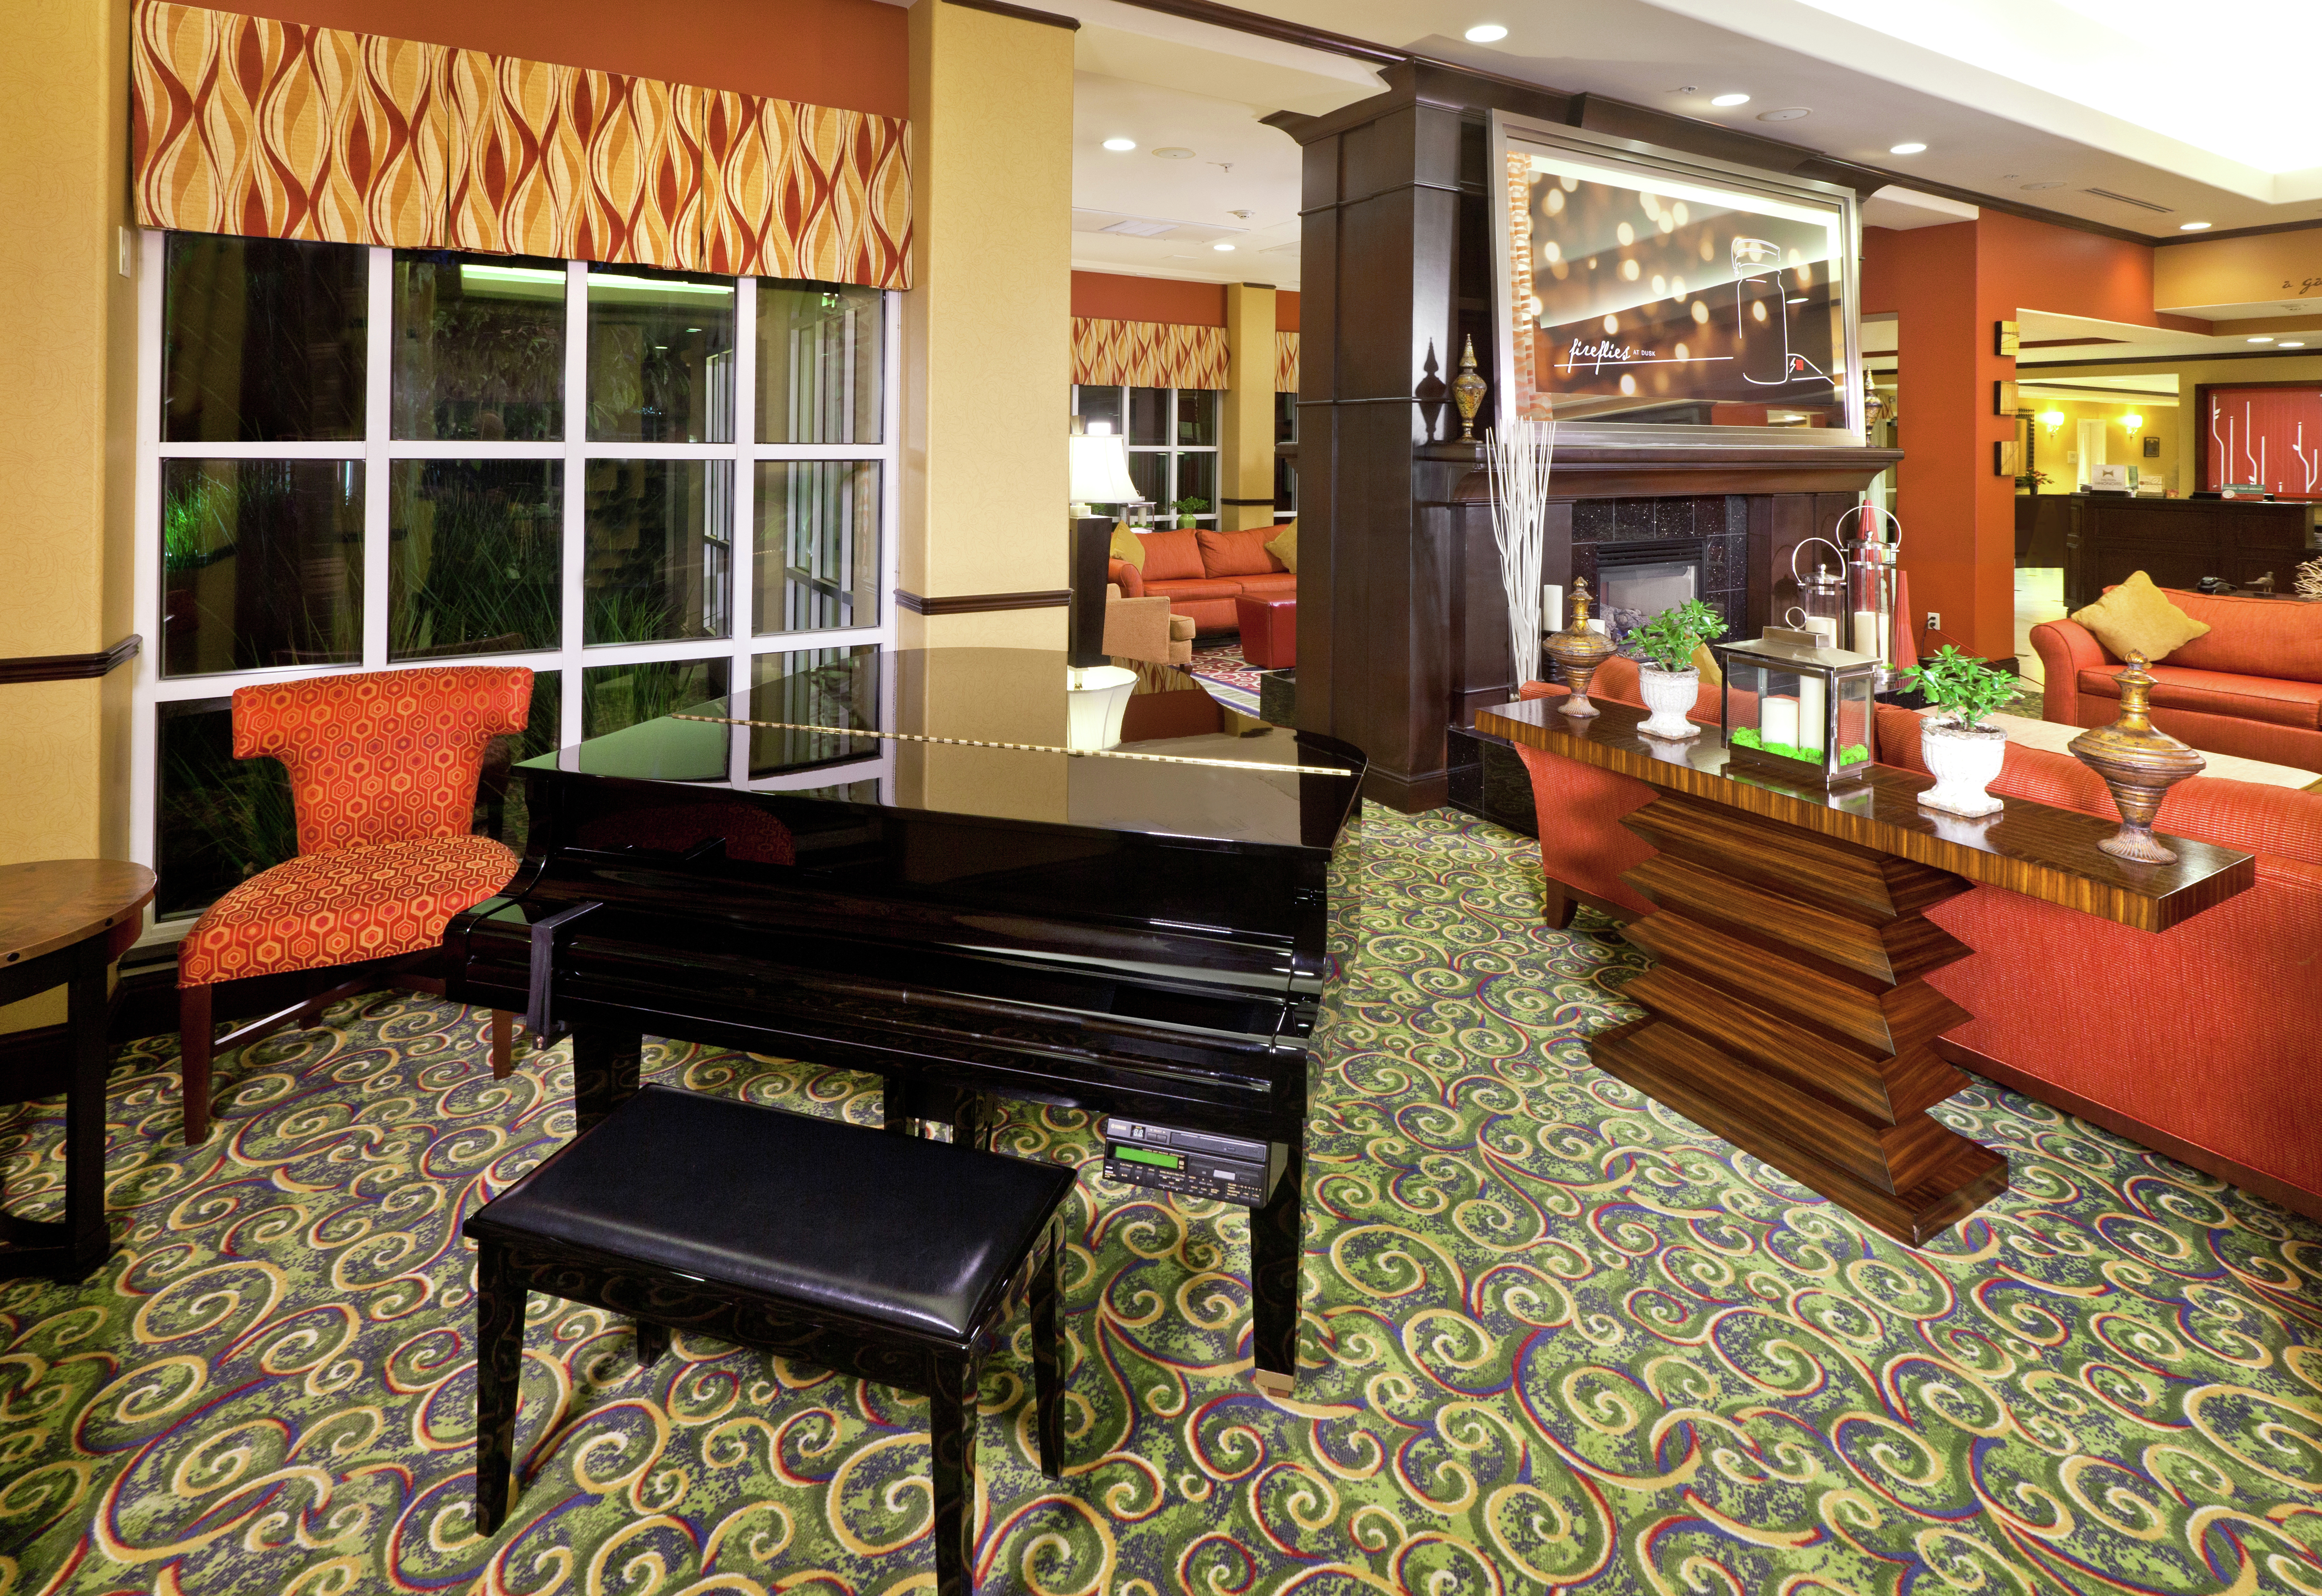 Lobby and Lounge Area with Grand Piano and Modern Furnishings 